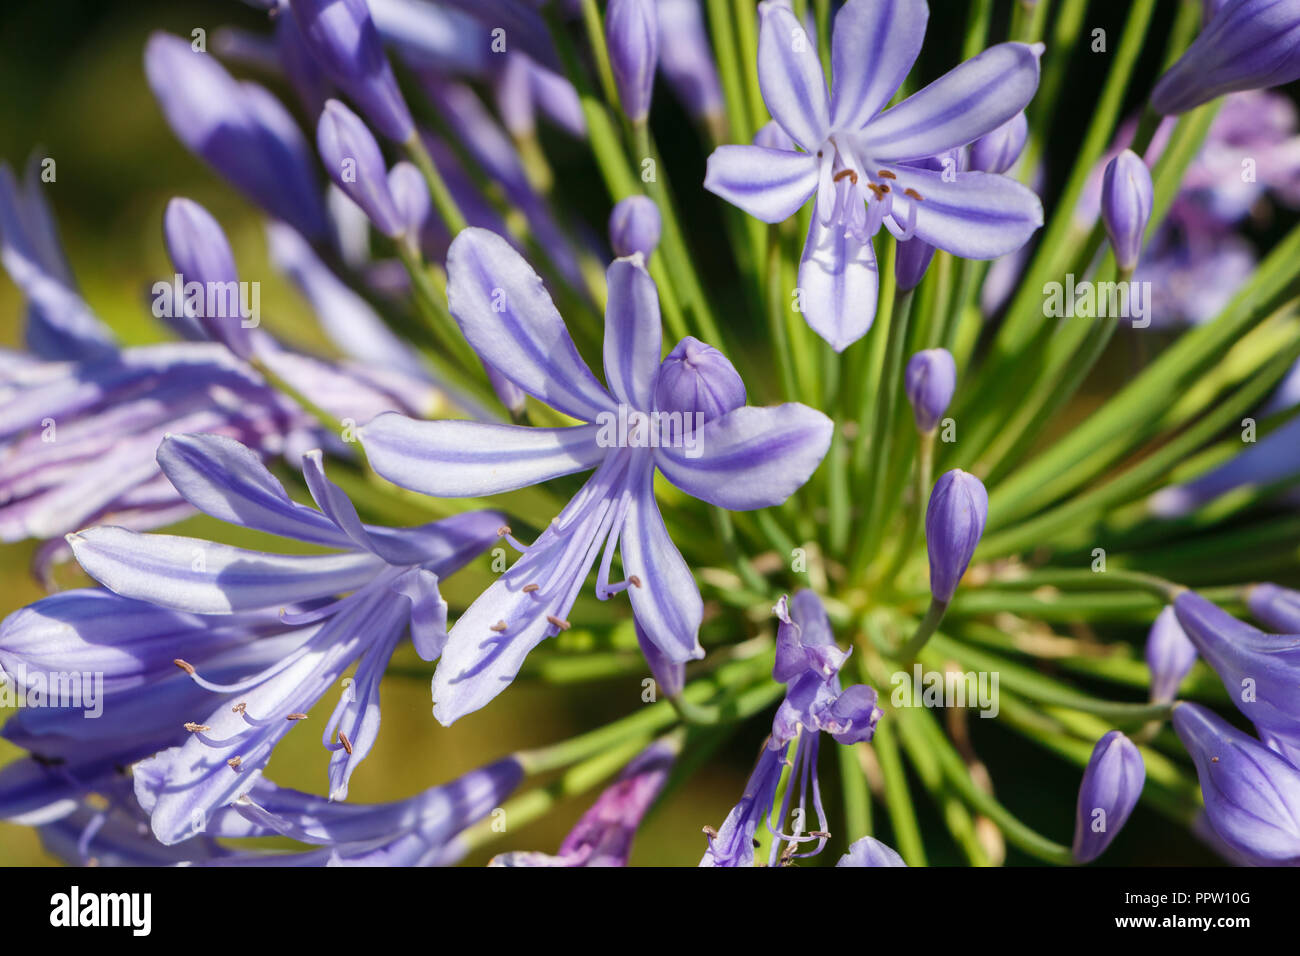 Purple agapanthus flower in a garden during summer Stock Photo